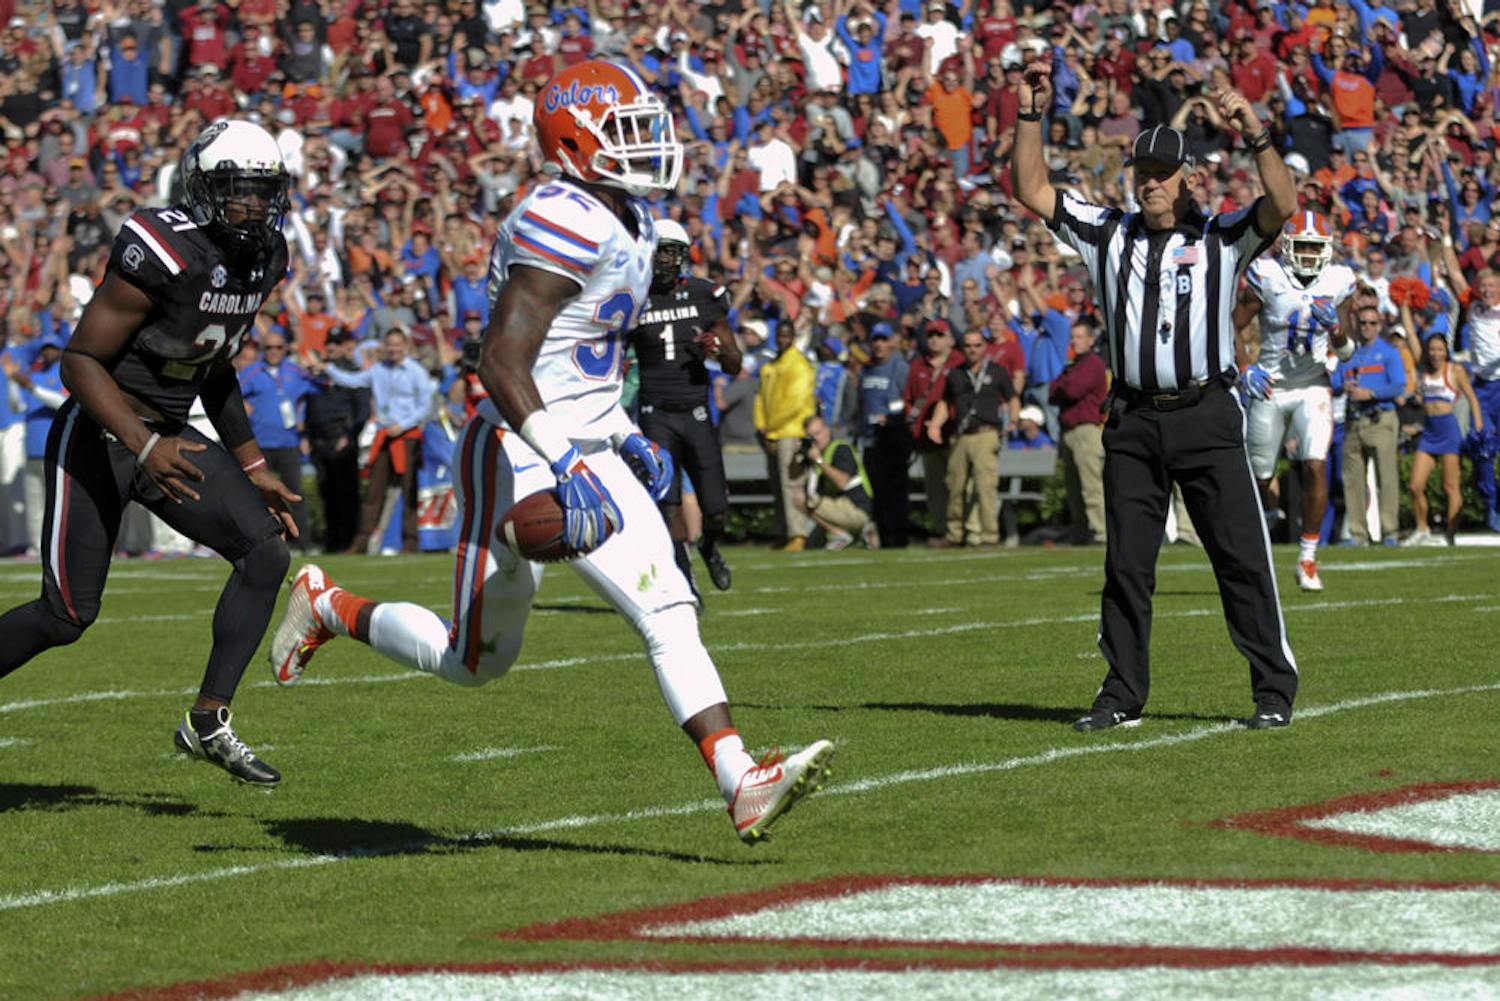 Jordan Cronkrite runs into the end zone for a touchdown during Florida's 24-14 win against South Carolina on Nov. 14, 2015, at Williams-Brice Stadium in Columbia, South Carolina.